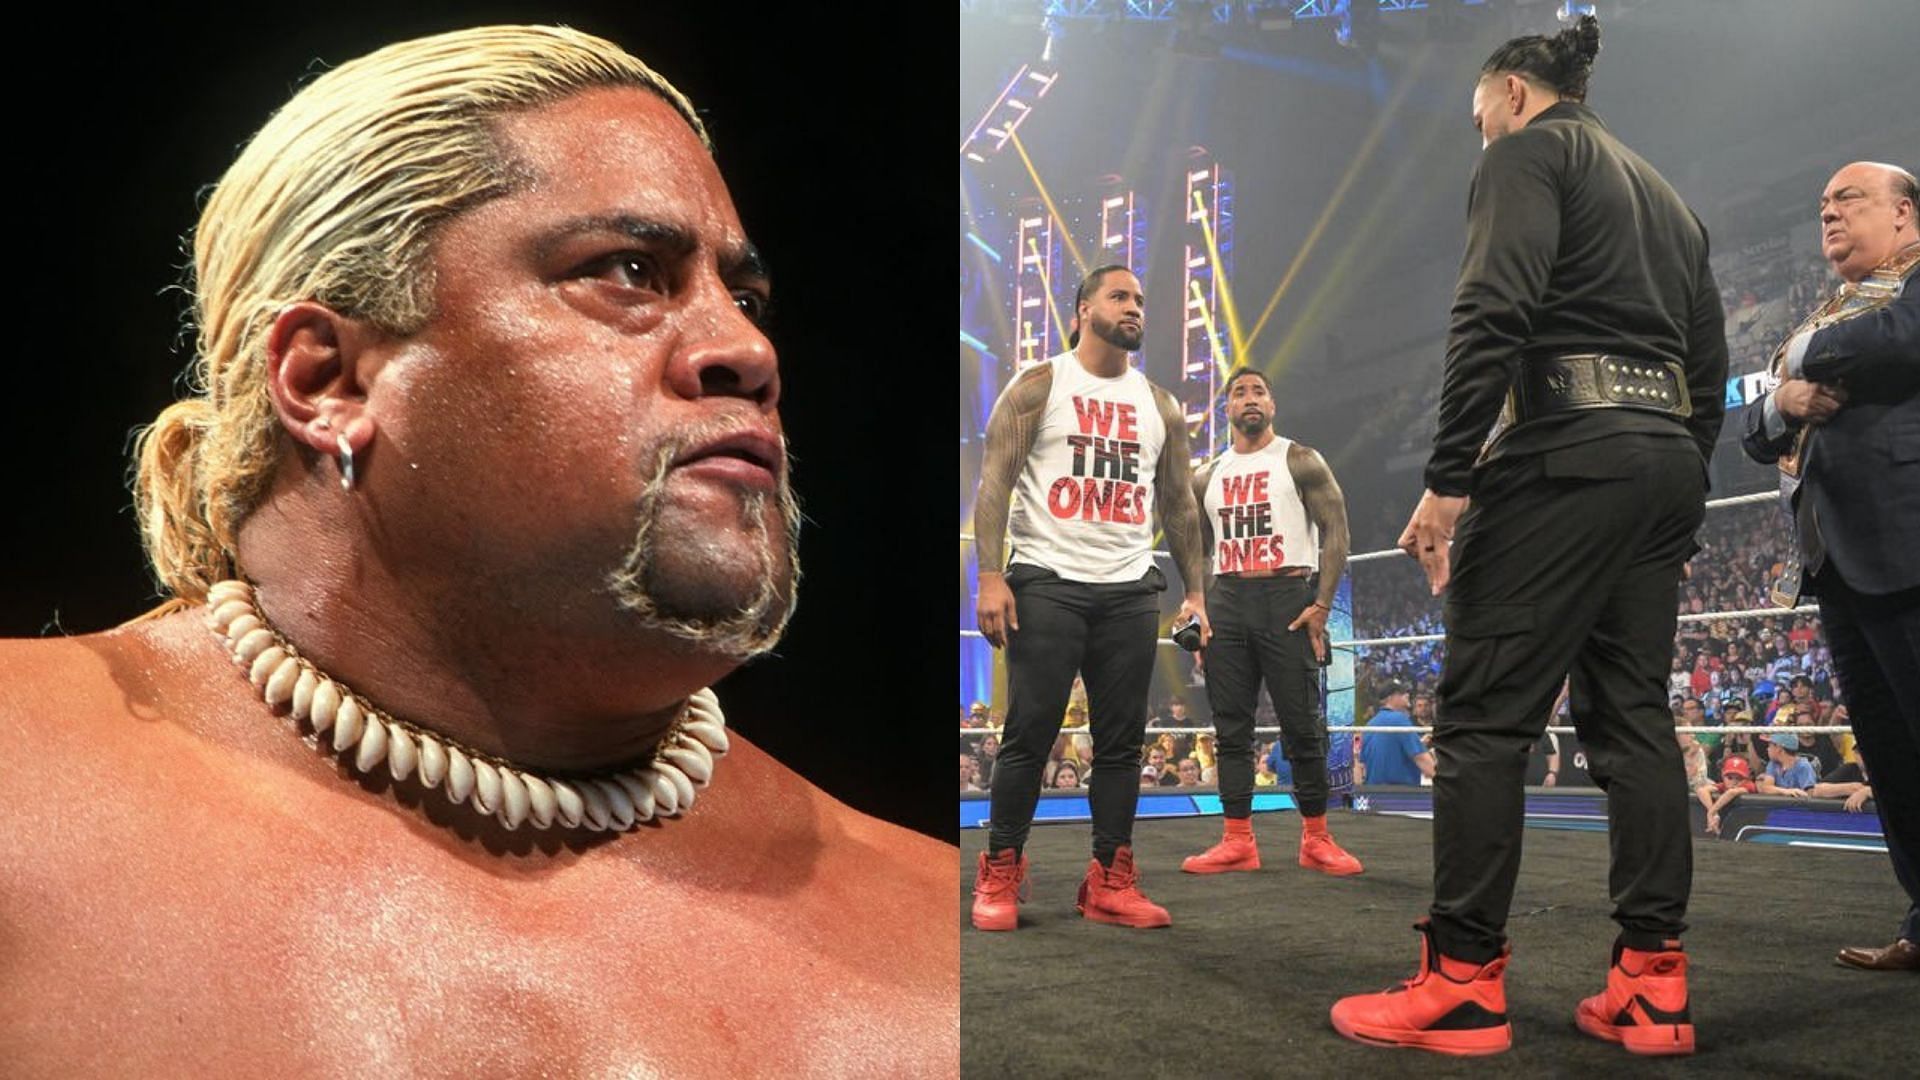 Rikishi sent a message ahead of Jey Uso